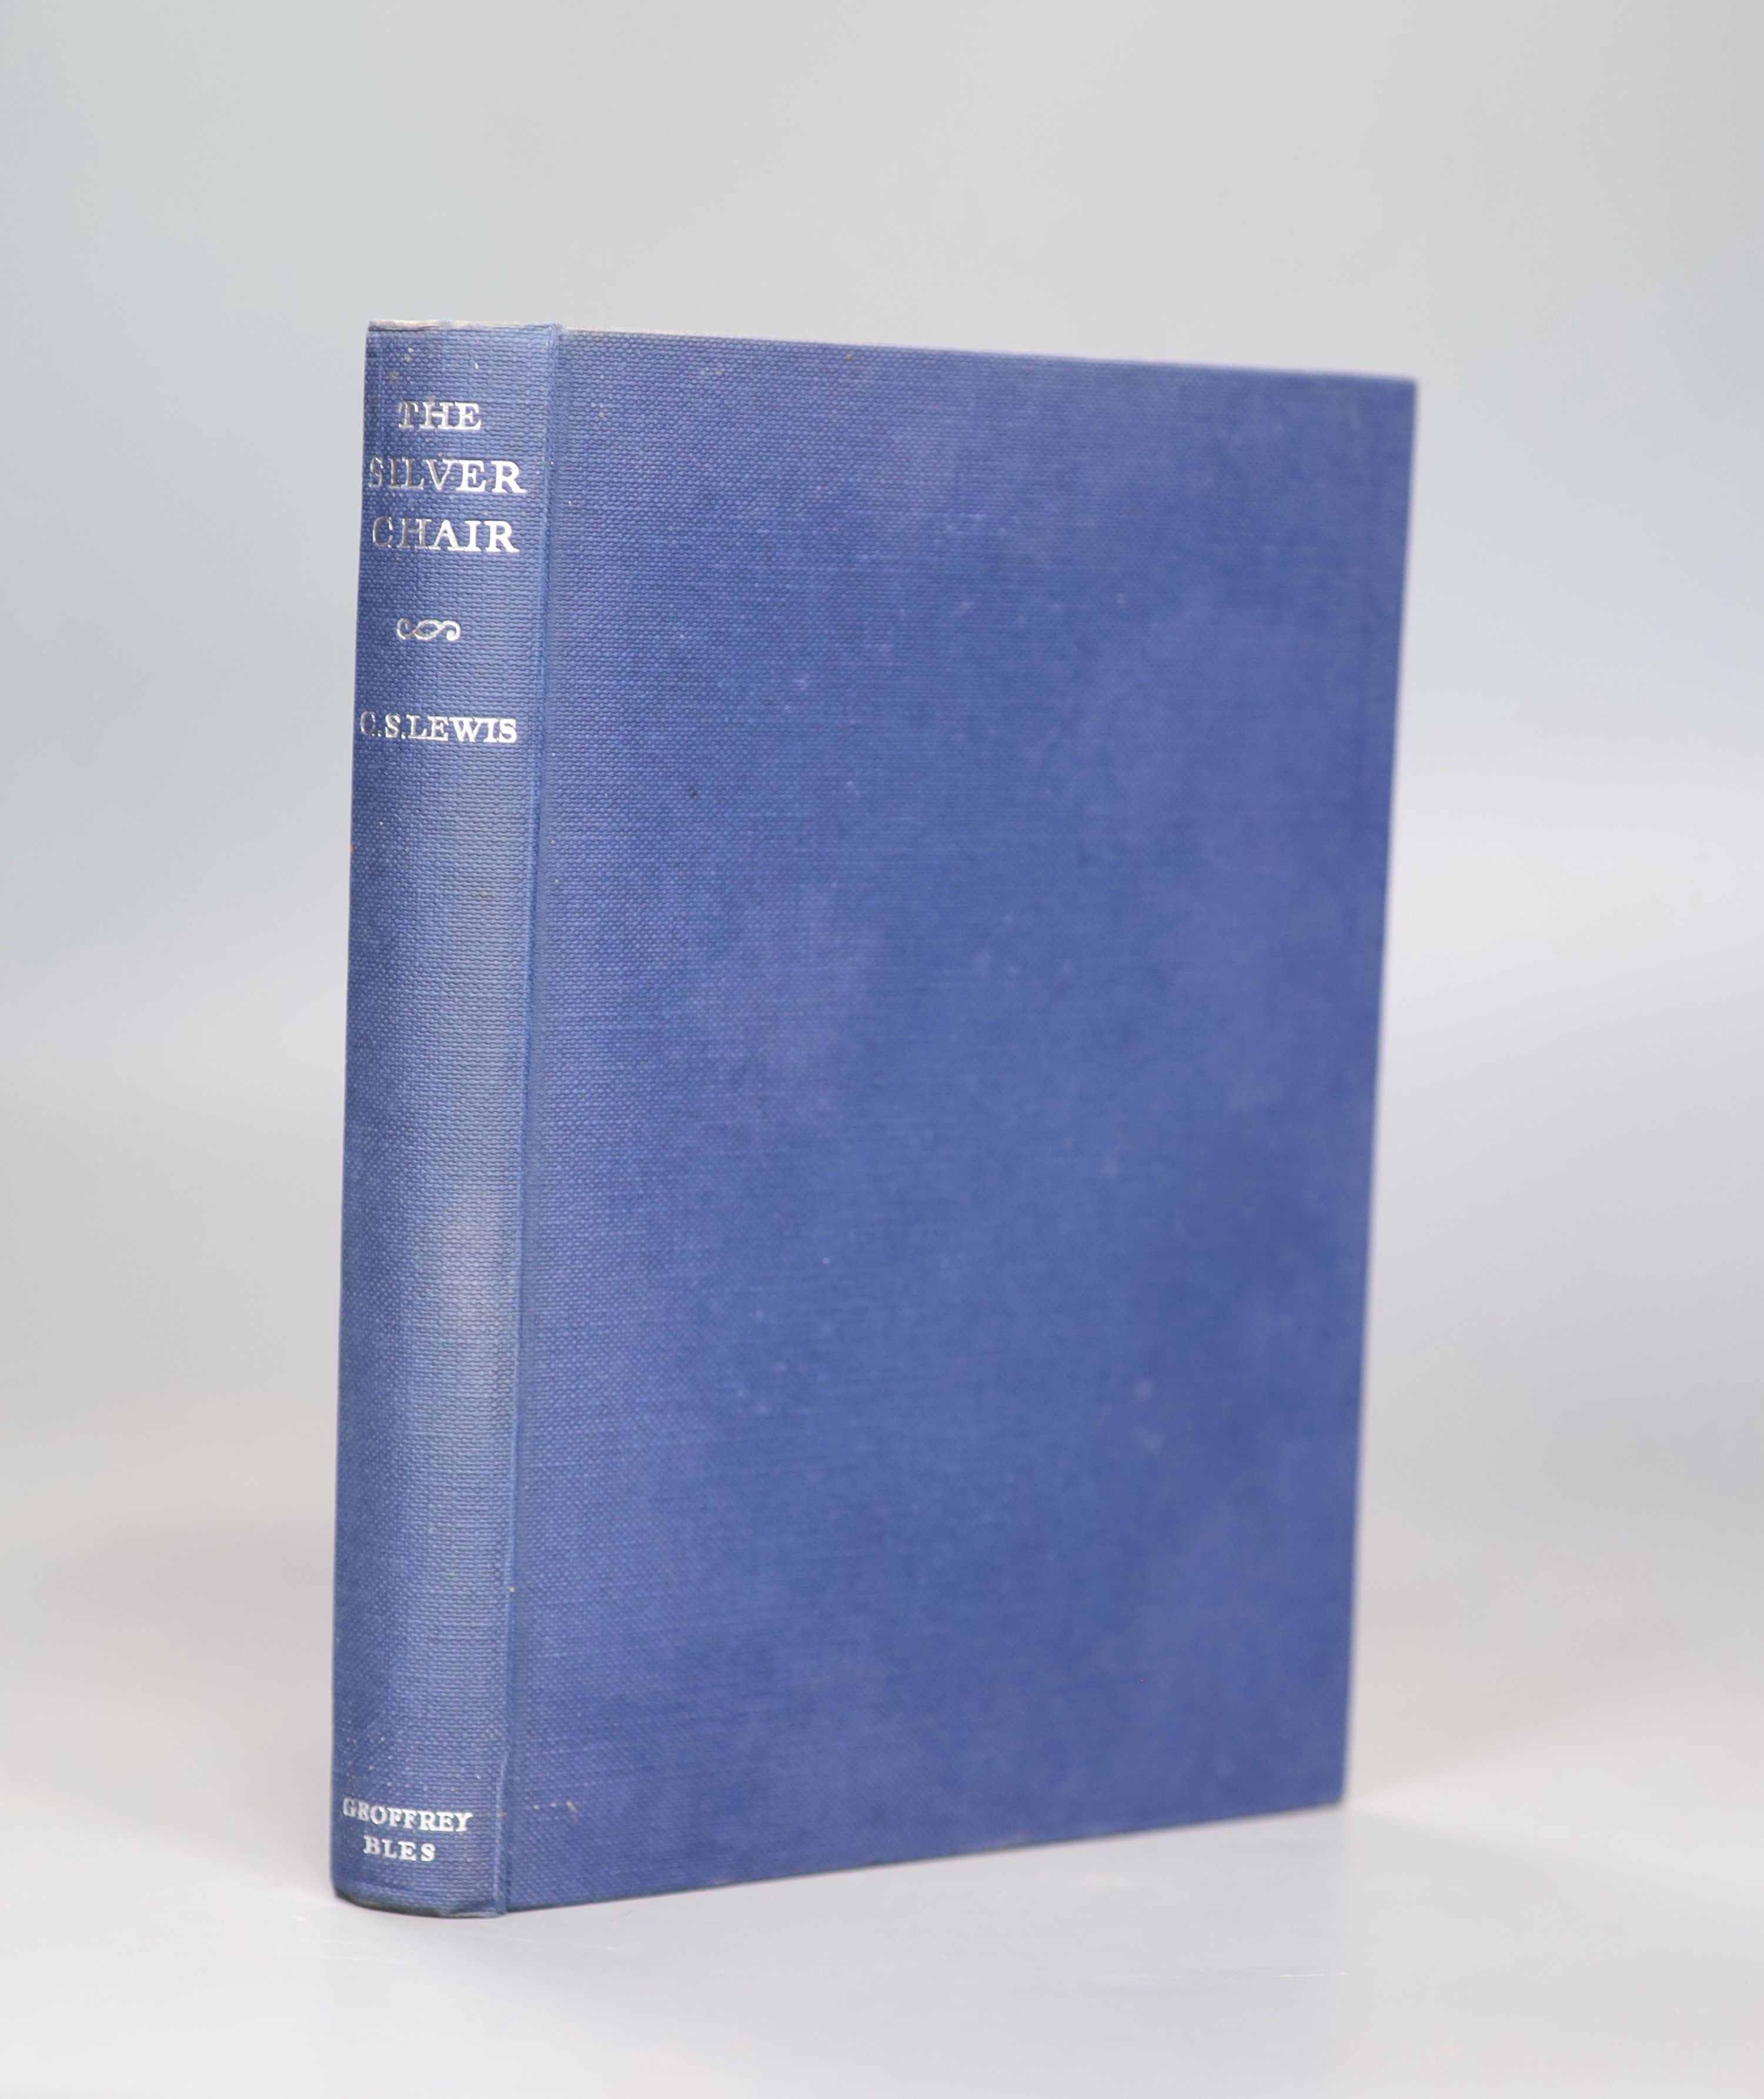 ° Lewis, Clive Staples - The Silver Chair, 1st edition, 8vo, illustrated by Pauline Baynes, original - Image 2 of 5